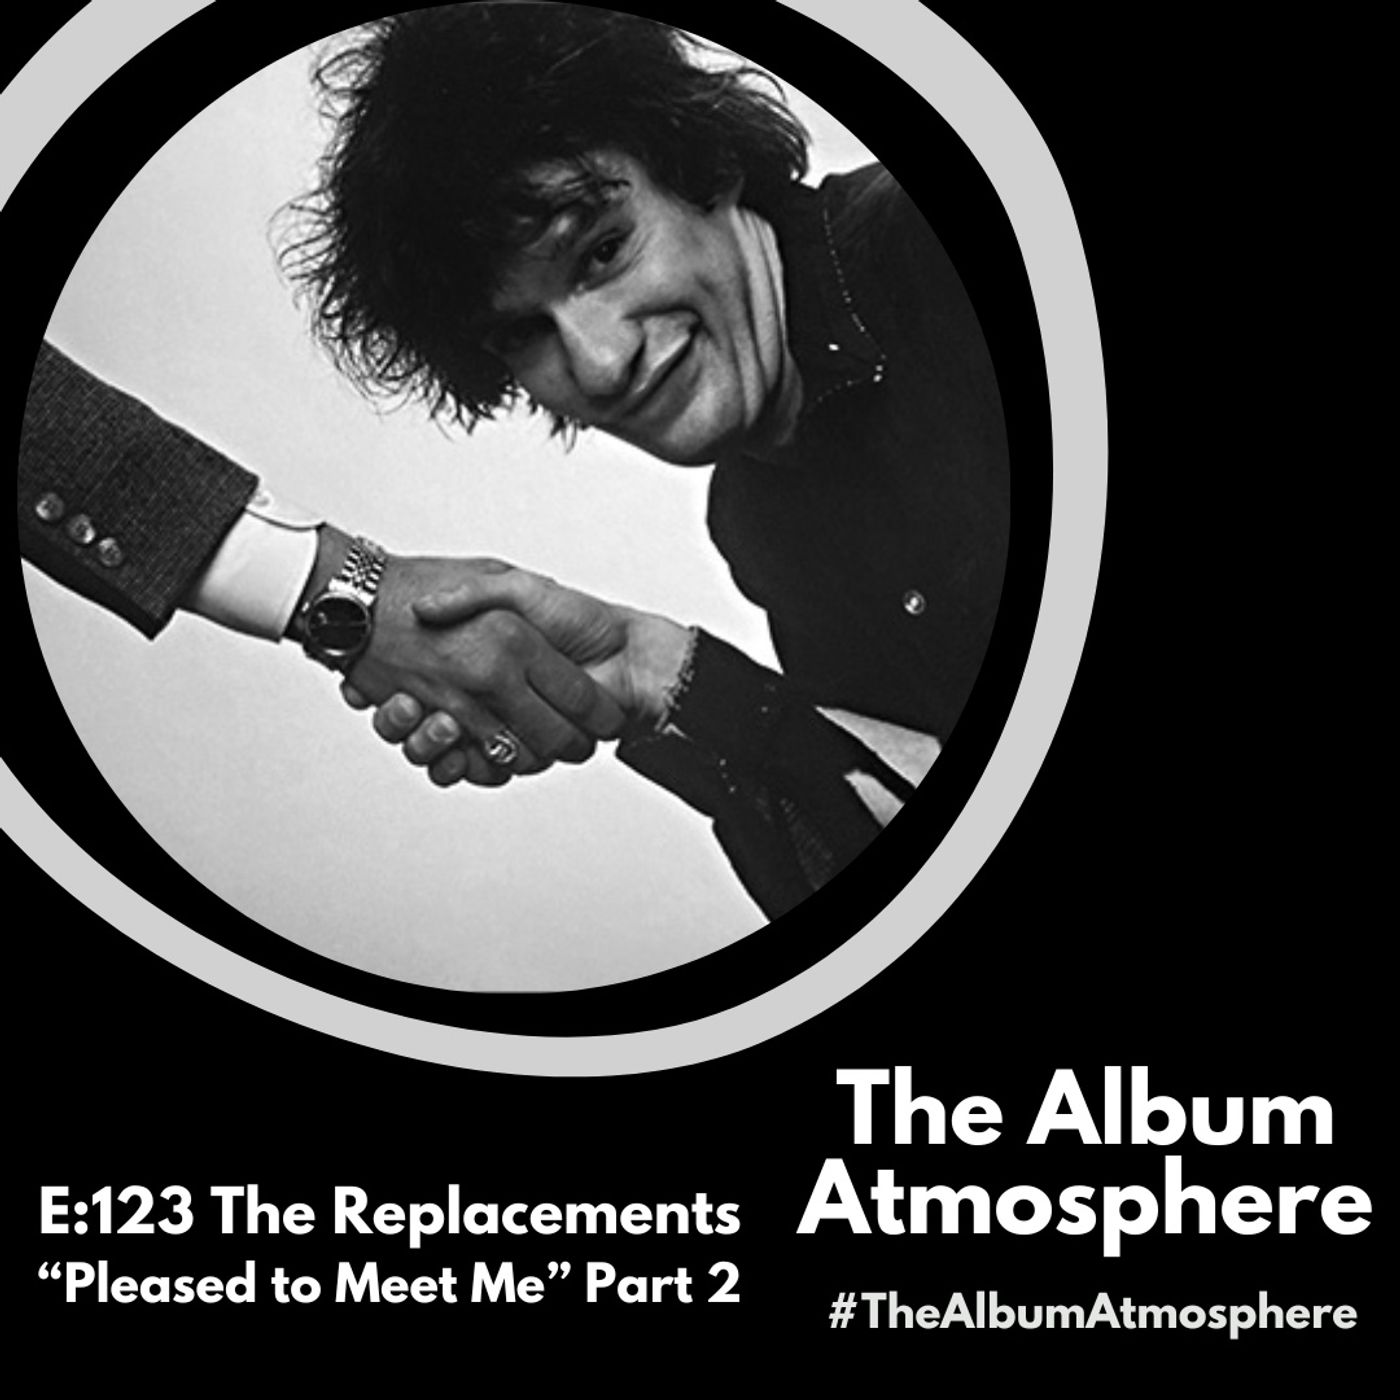 E:123 - The Replacements - "Pleased to Meet Me" Part 2